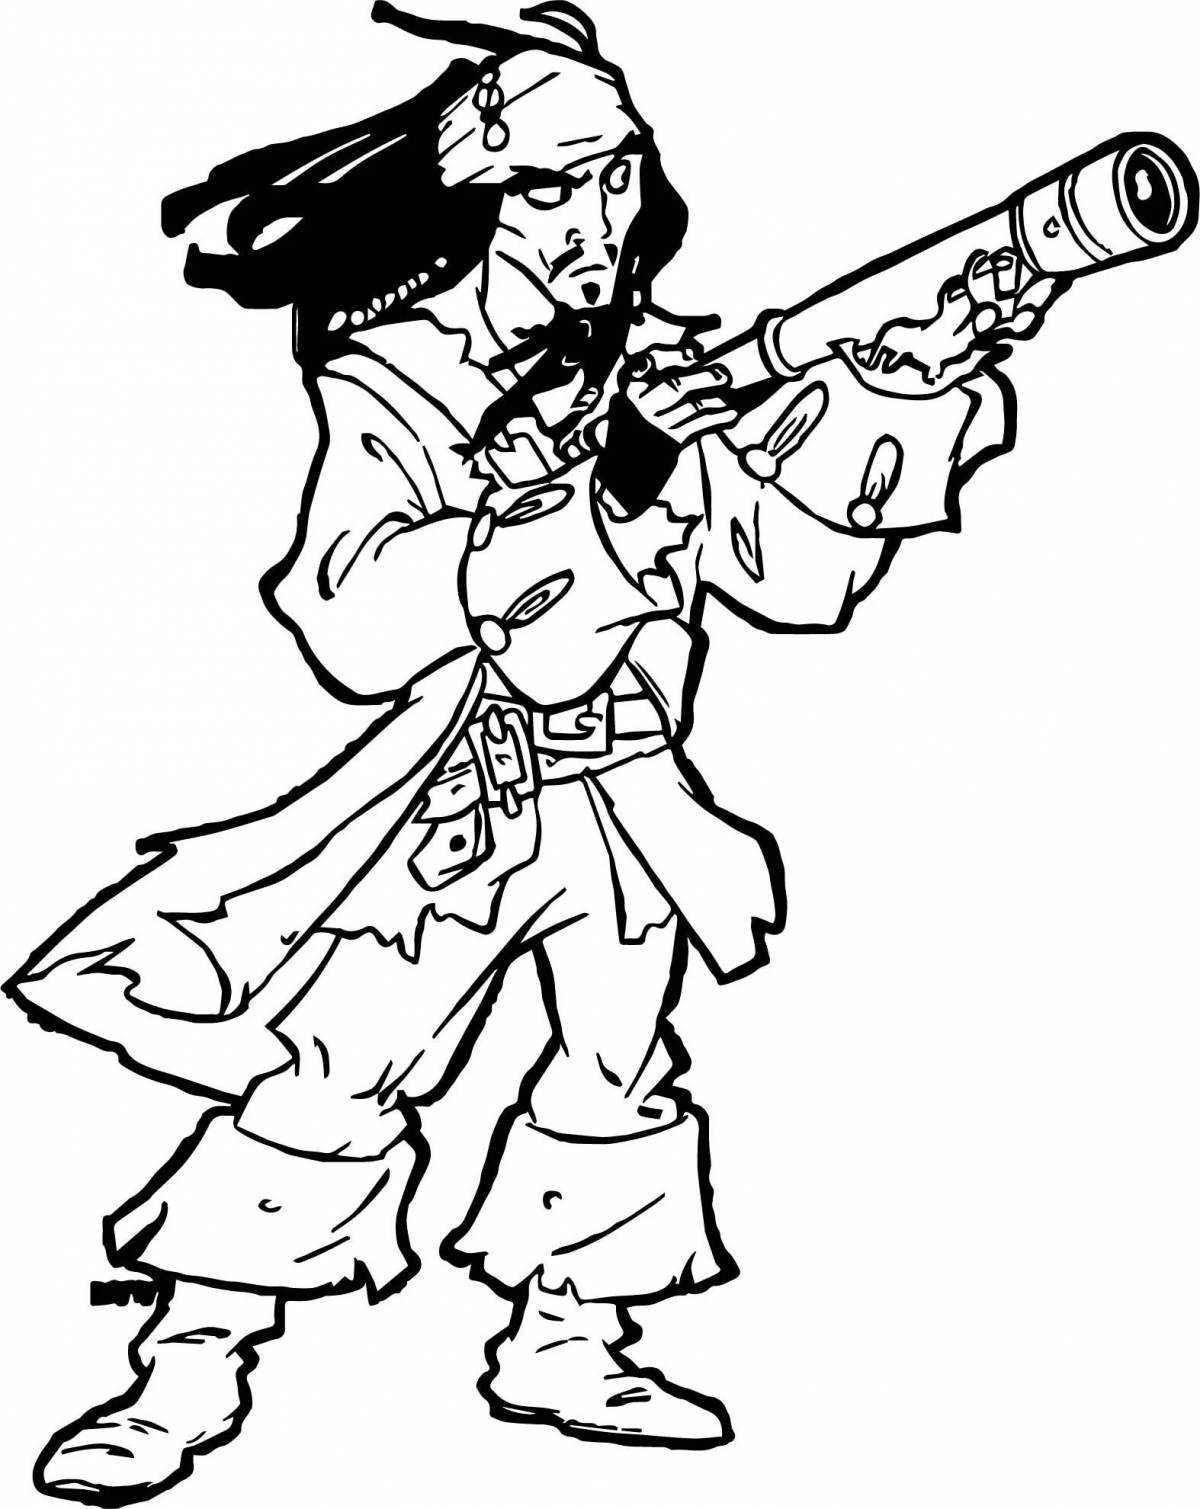 Glorious Jack Sparrow coloring page